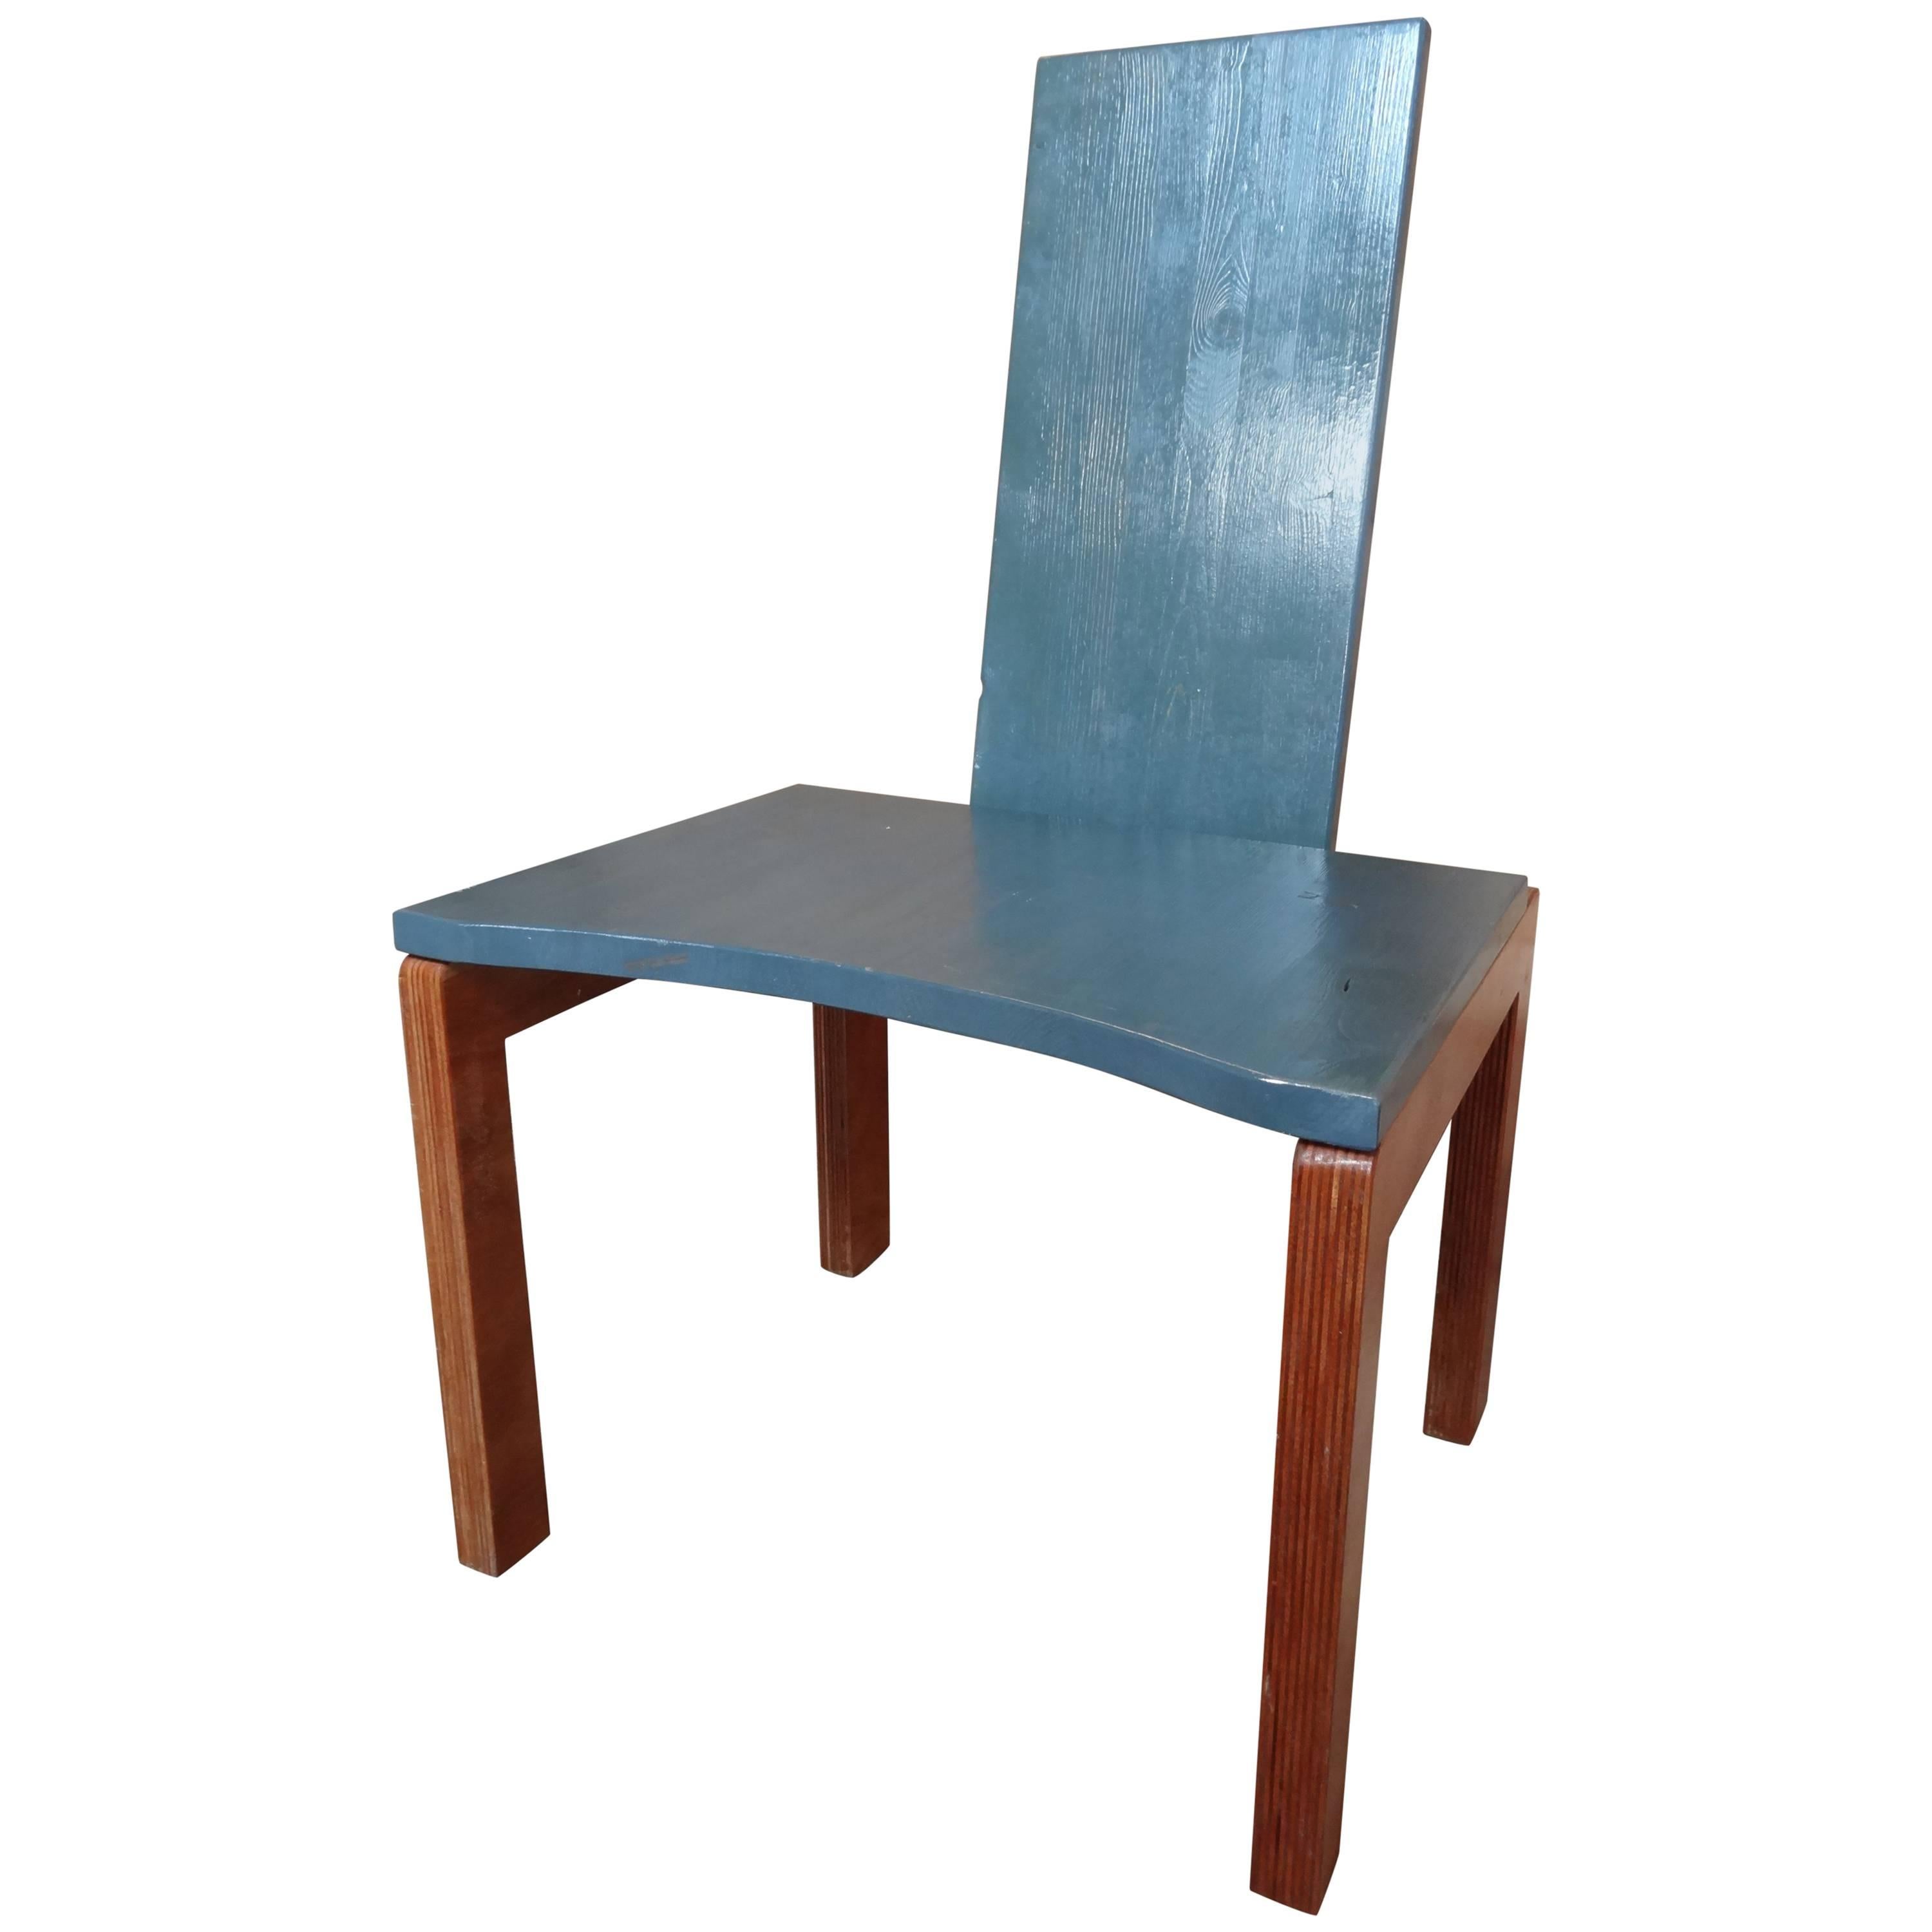 Brutalist Minimalistic Large Chair in Light Blue and Clear Lacquer